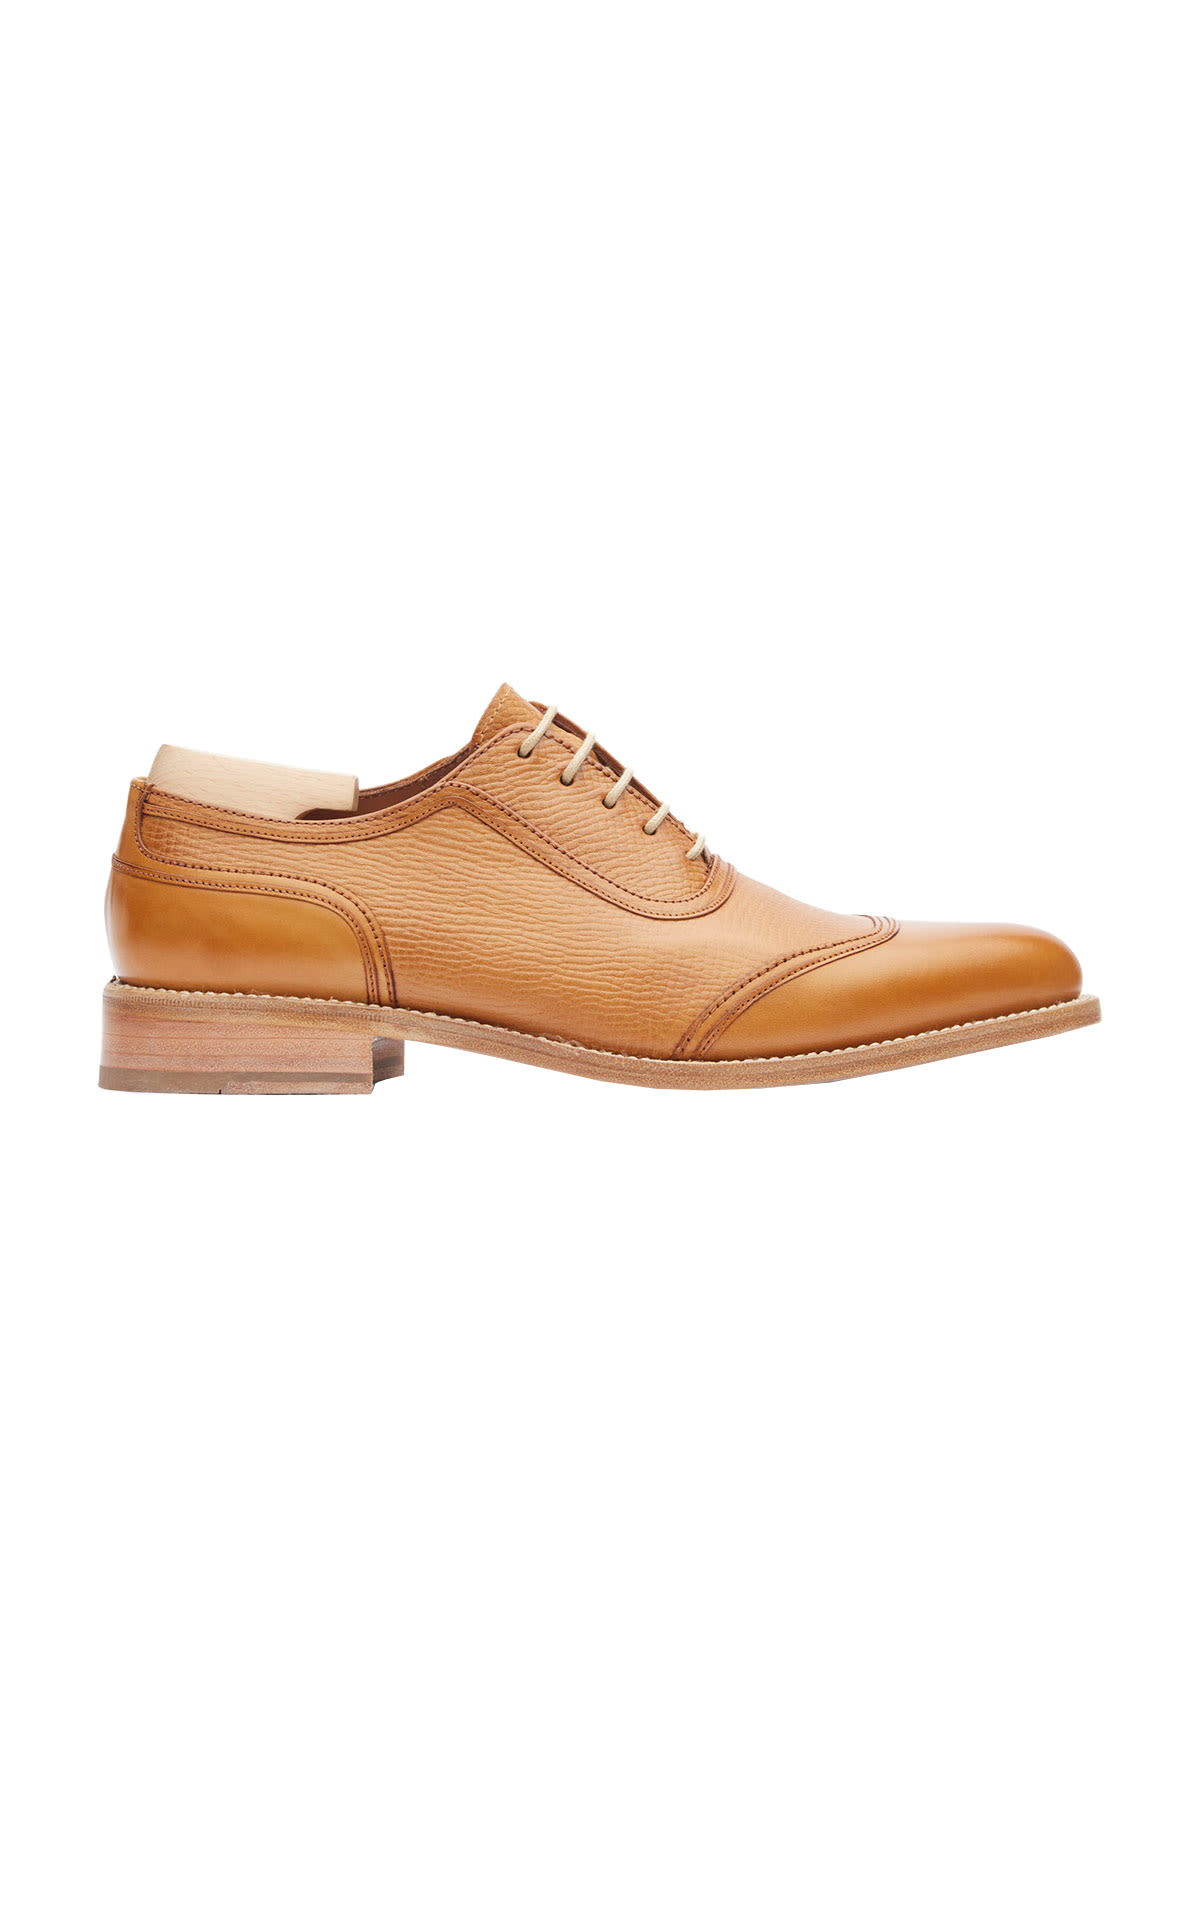 Classic Oxford Shoes for Men lottusse